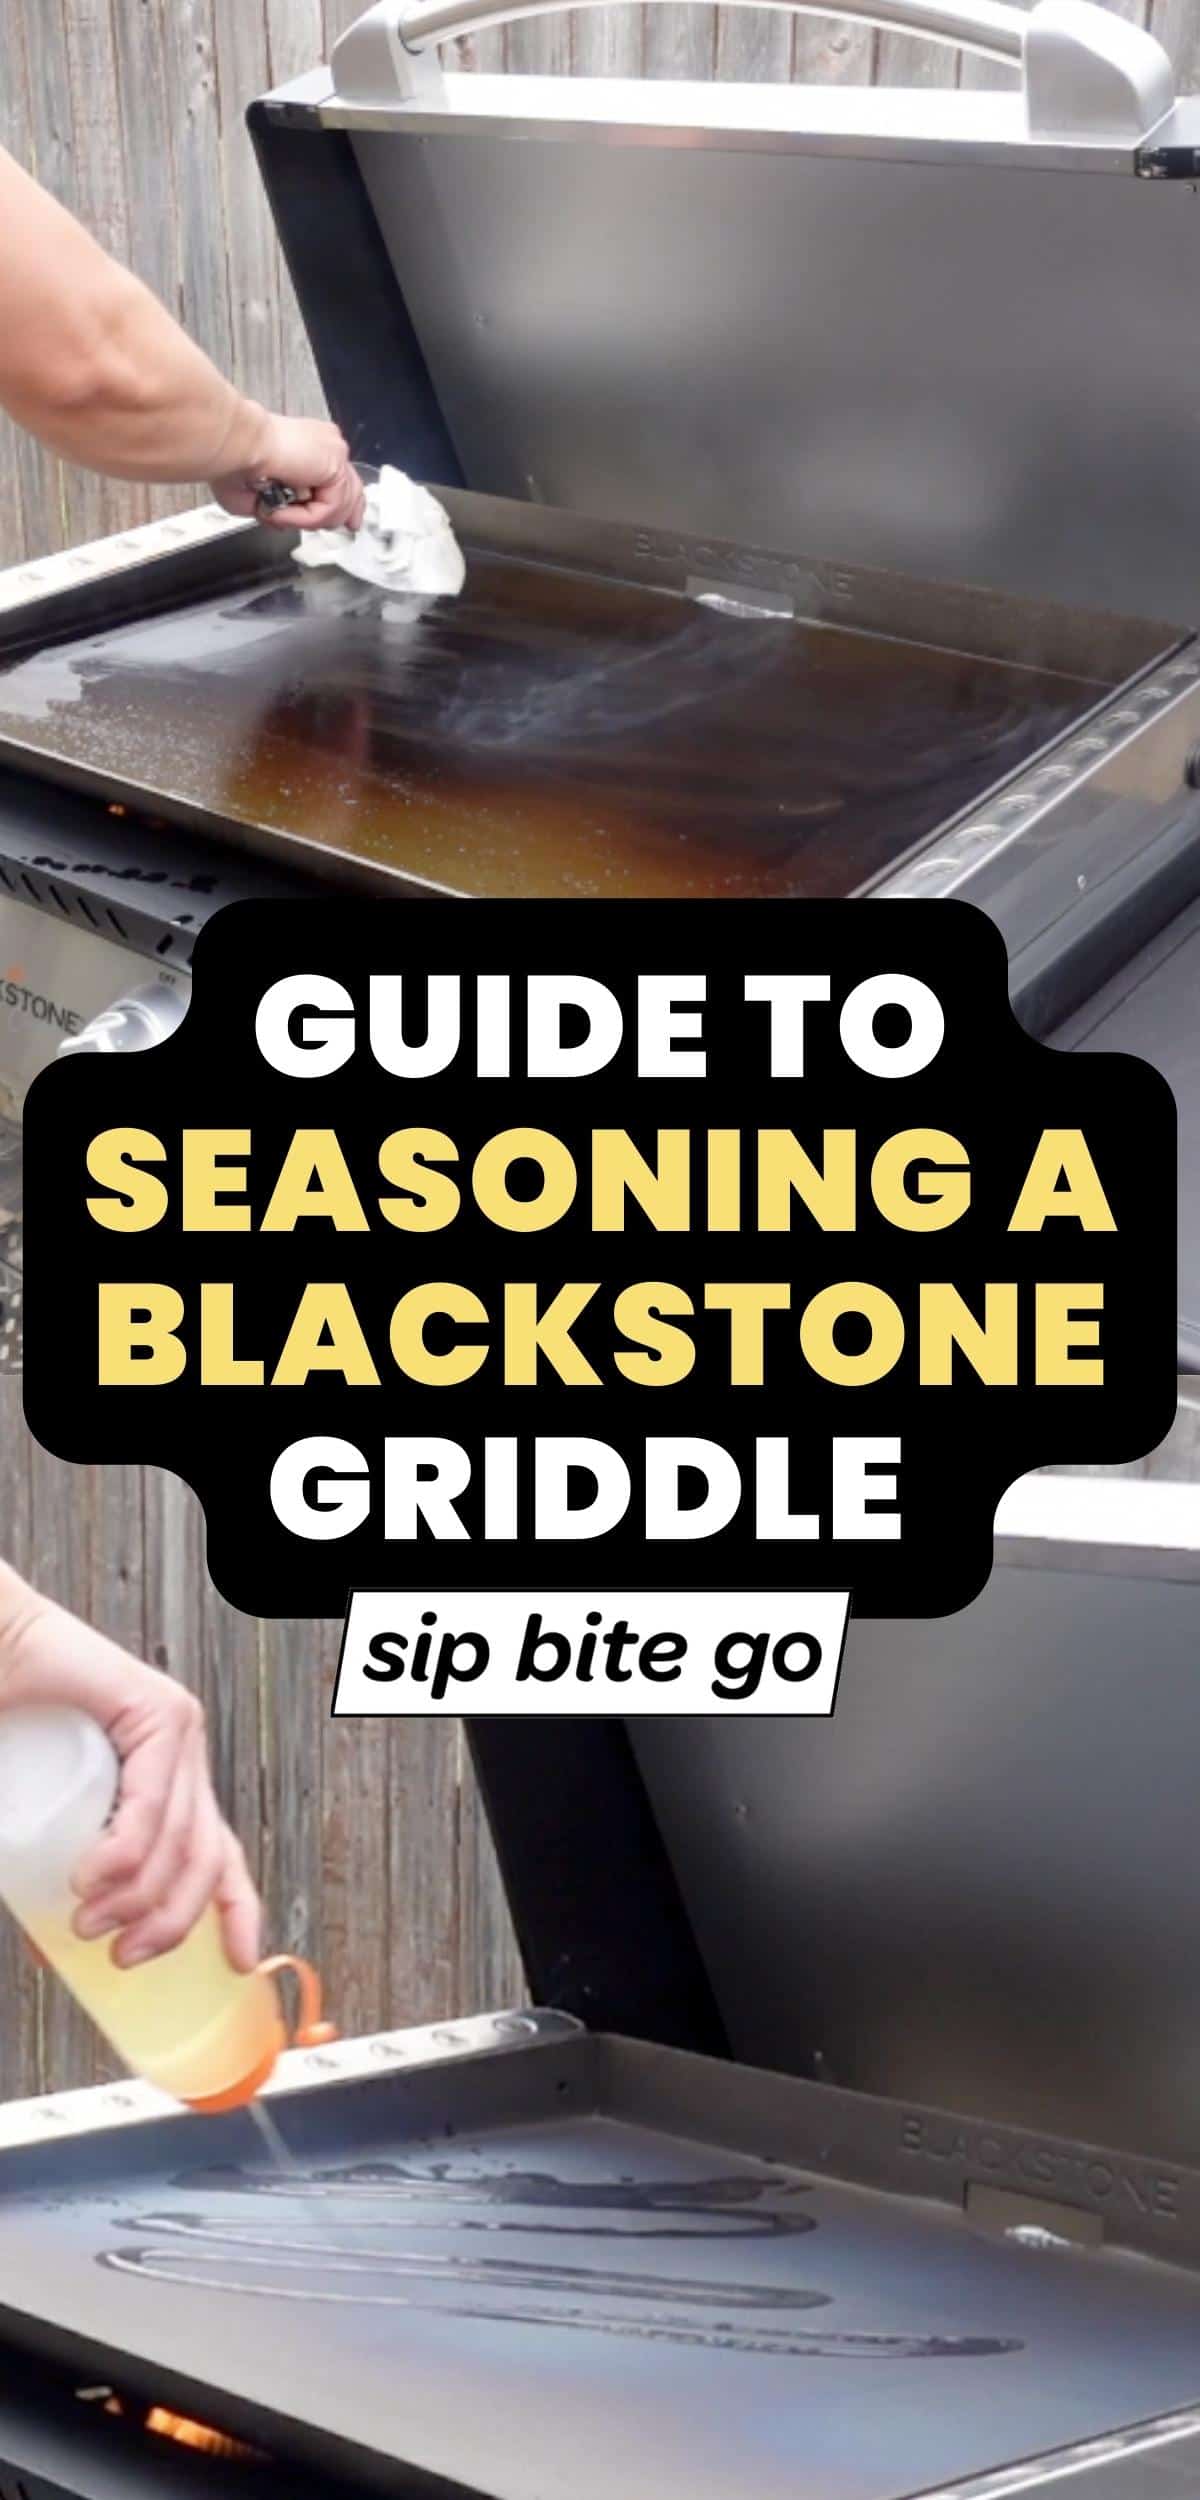 Guide to seasoning a Blackstone Griddle Grill with text overlay and images of process with Sip Bite Go logo